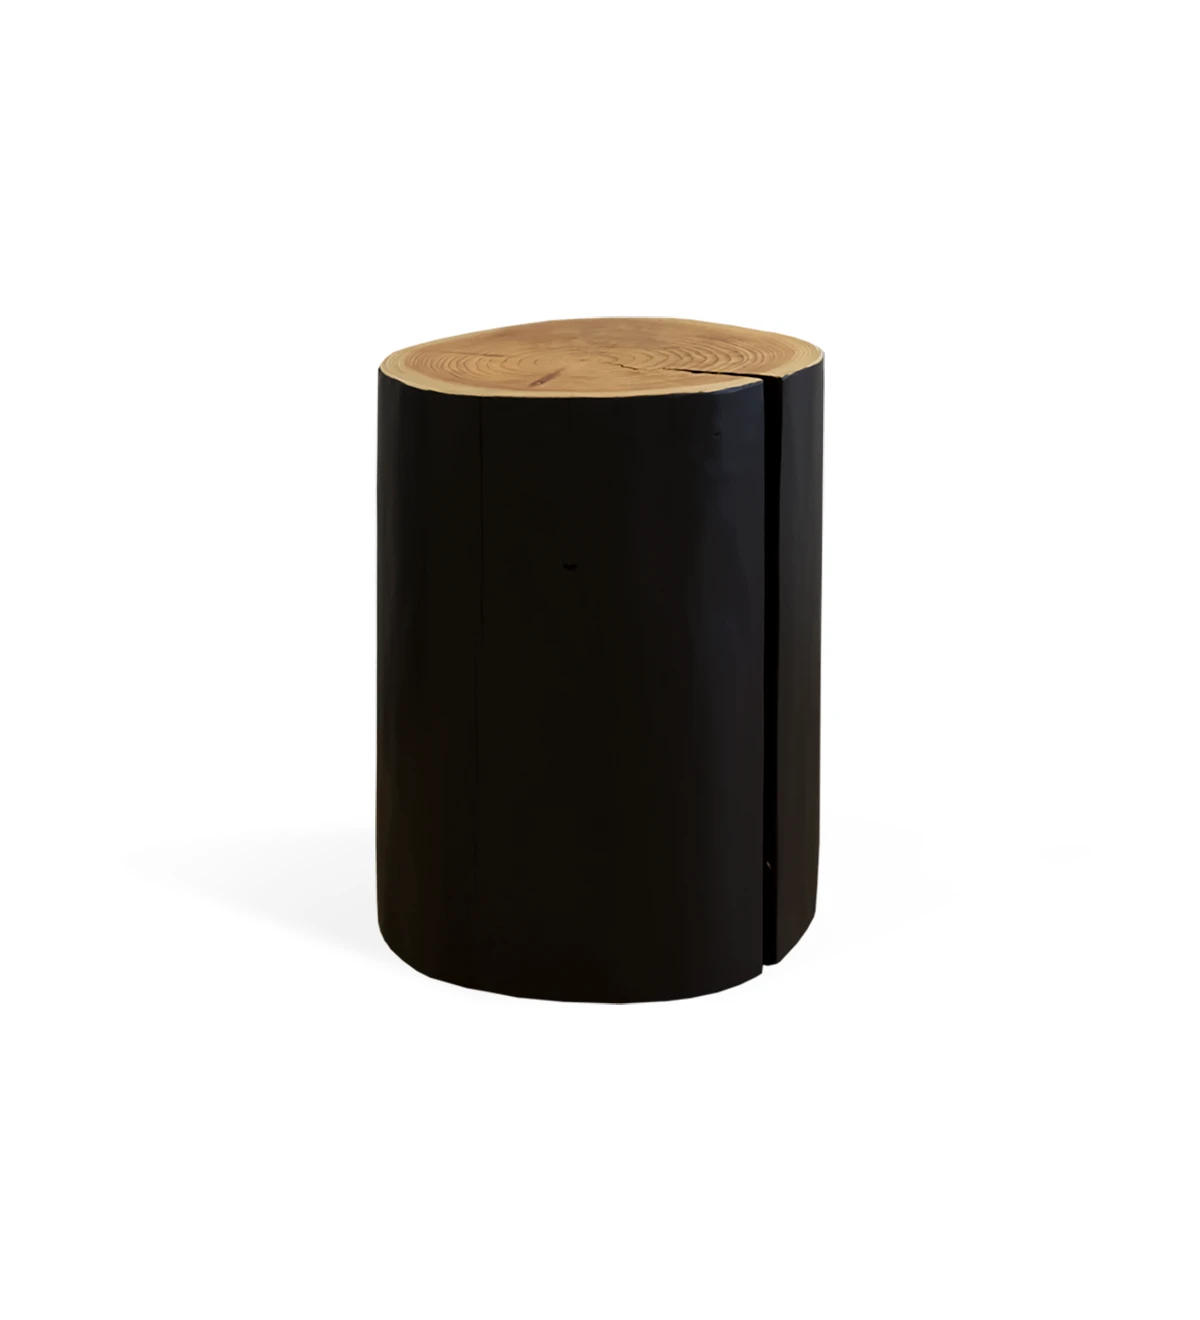 Trunk side table in natural cryptomeria wood lacquered in black, Ø 35 to 45 cm.